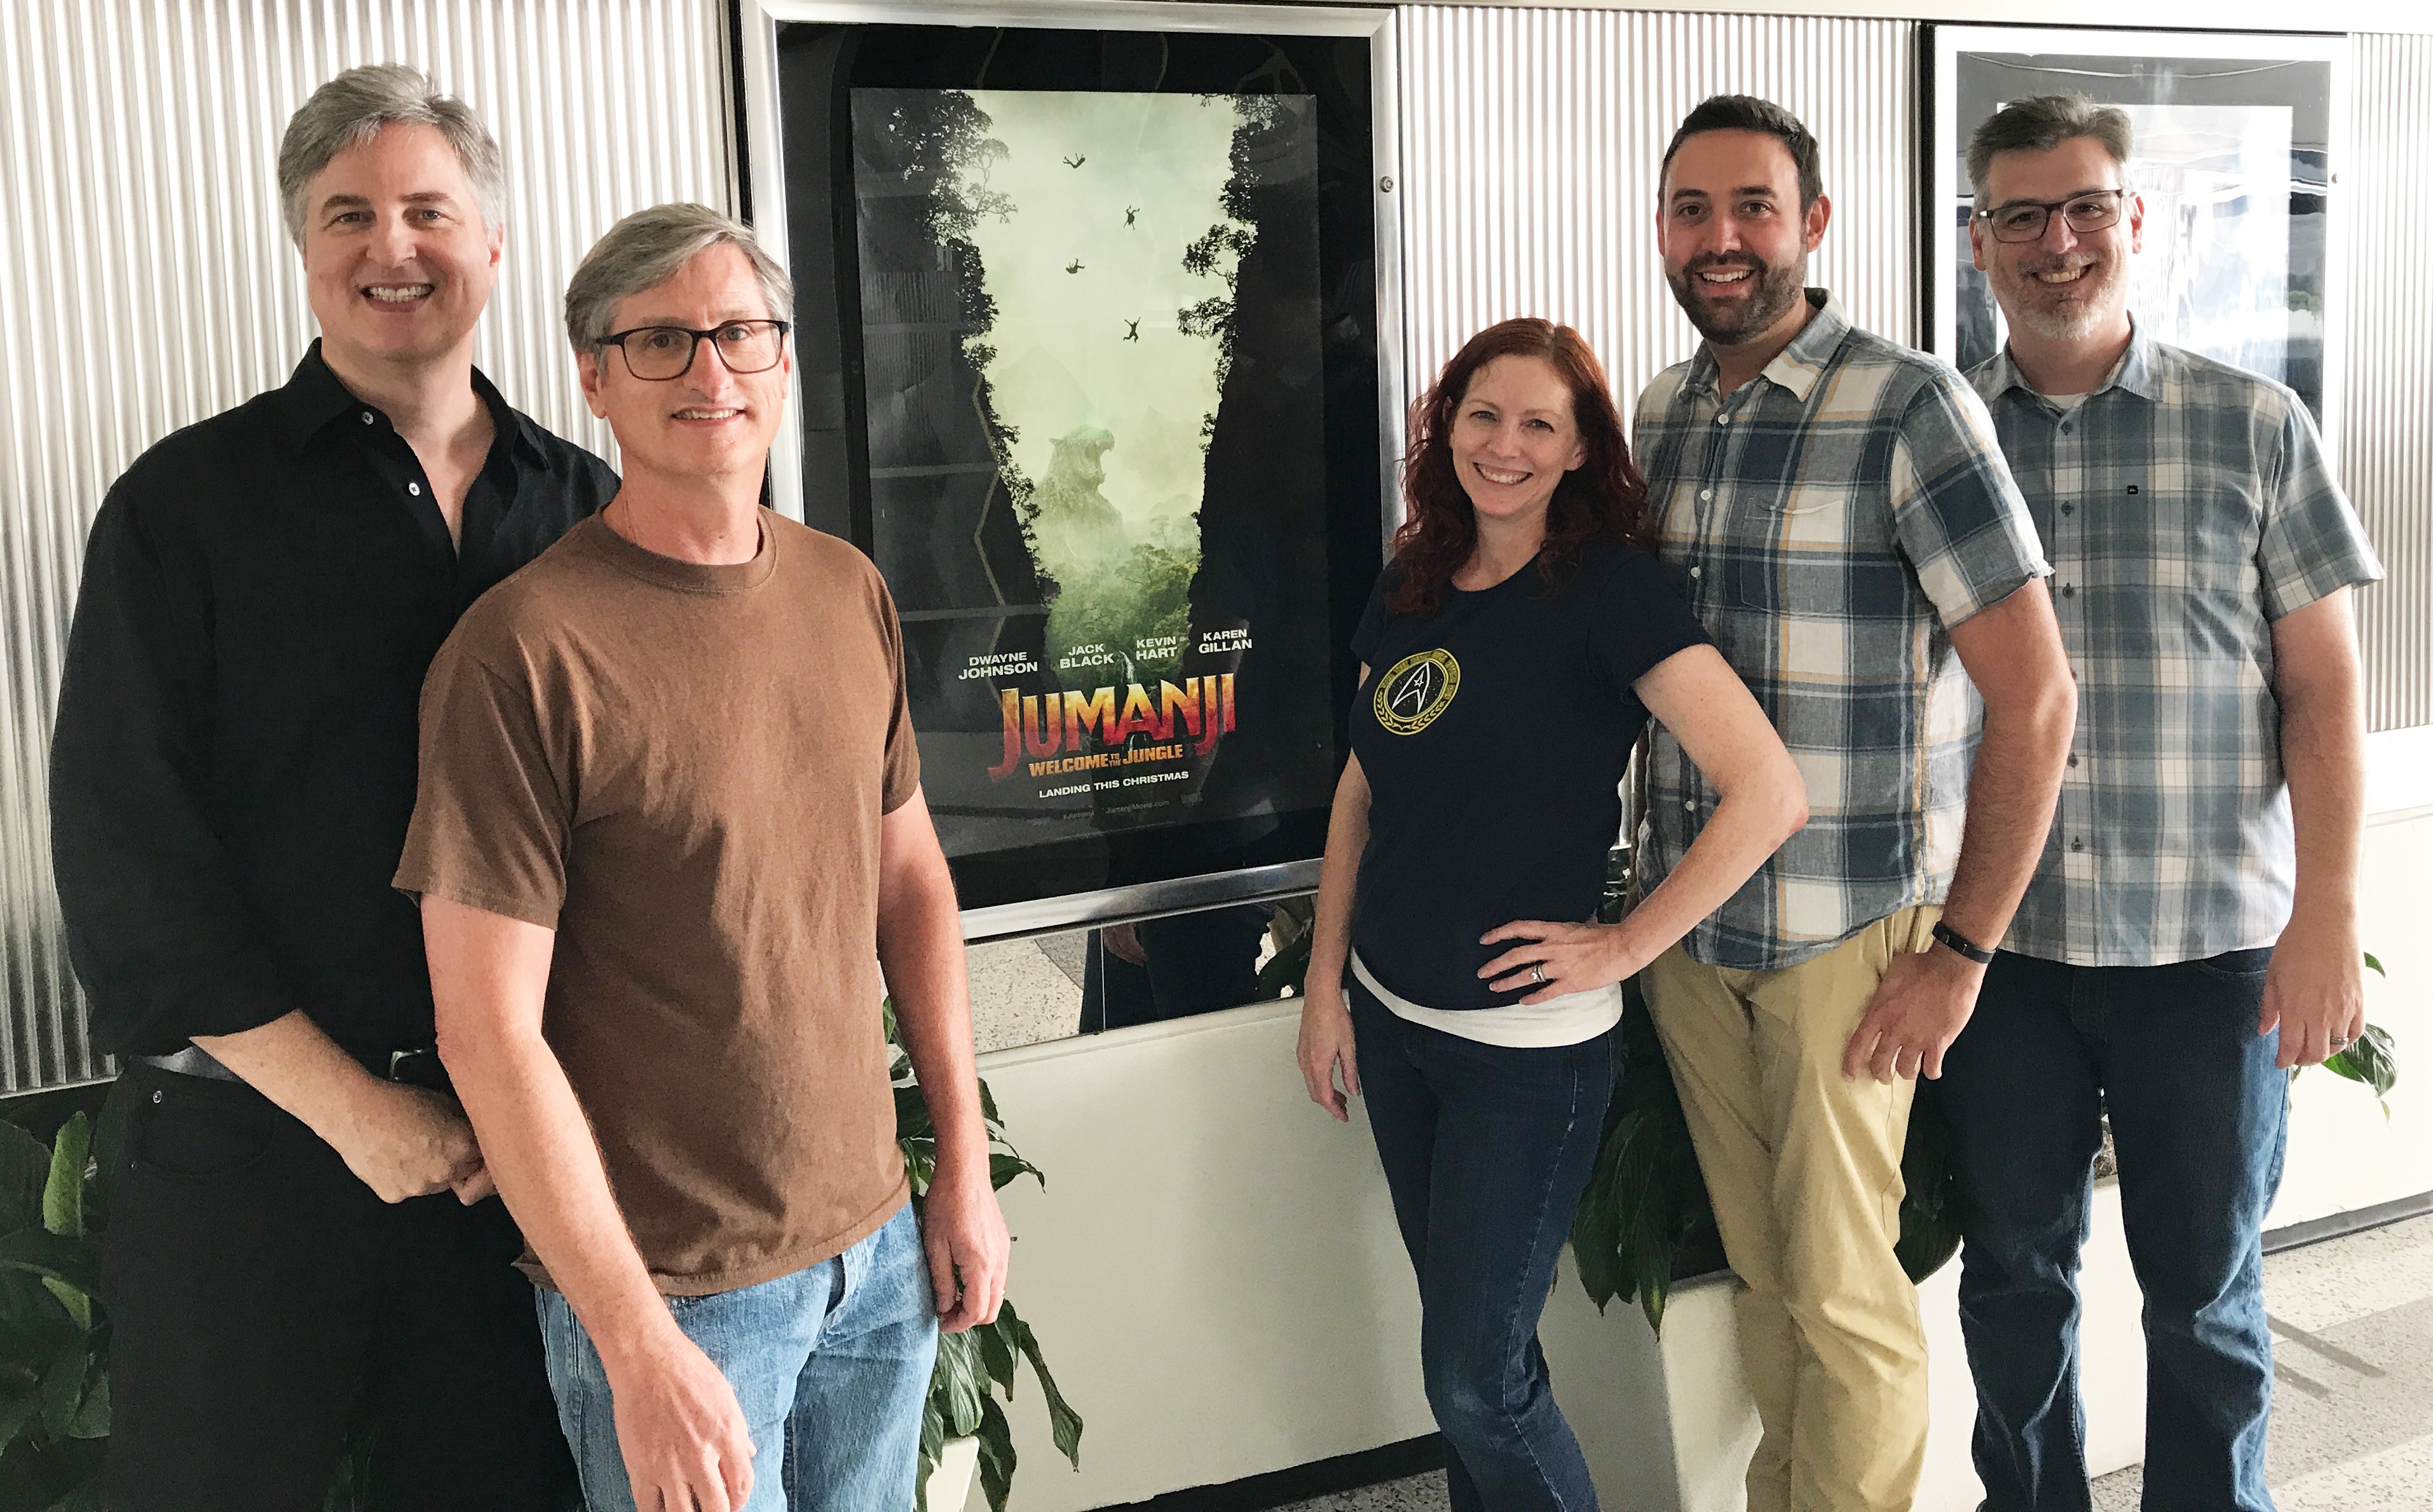 ART OF THE CUT on editing JUMANJI: Welcome to the Jungle 10